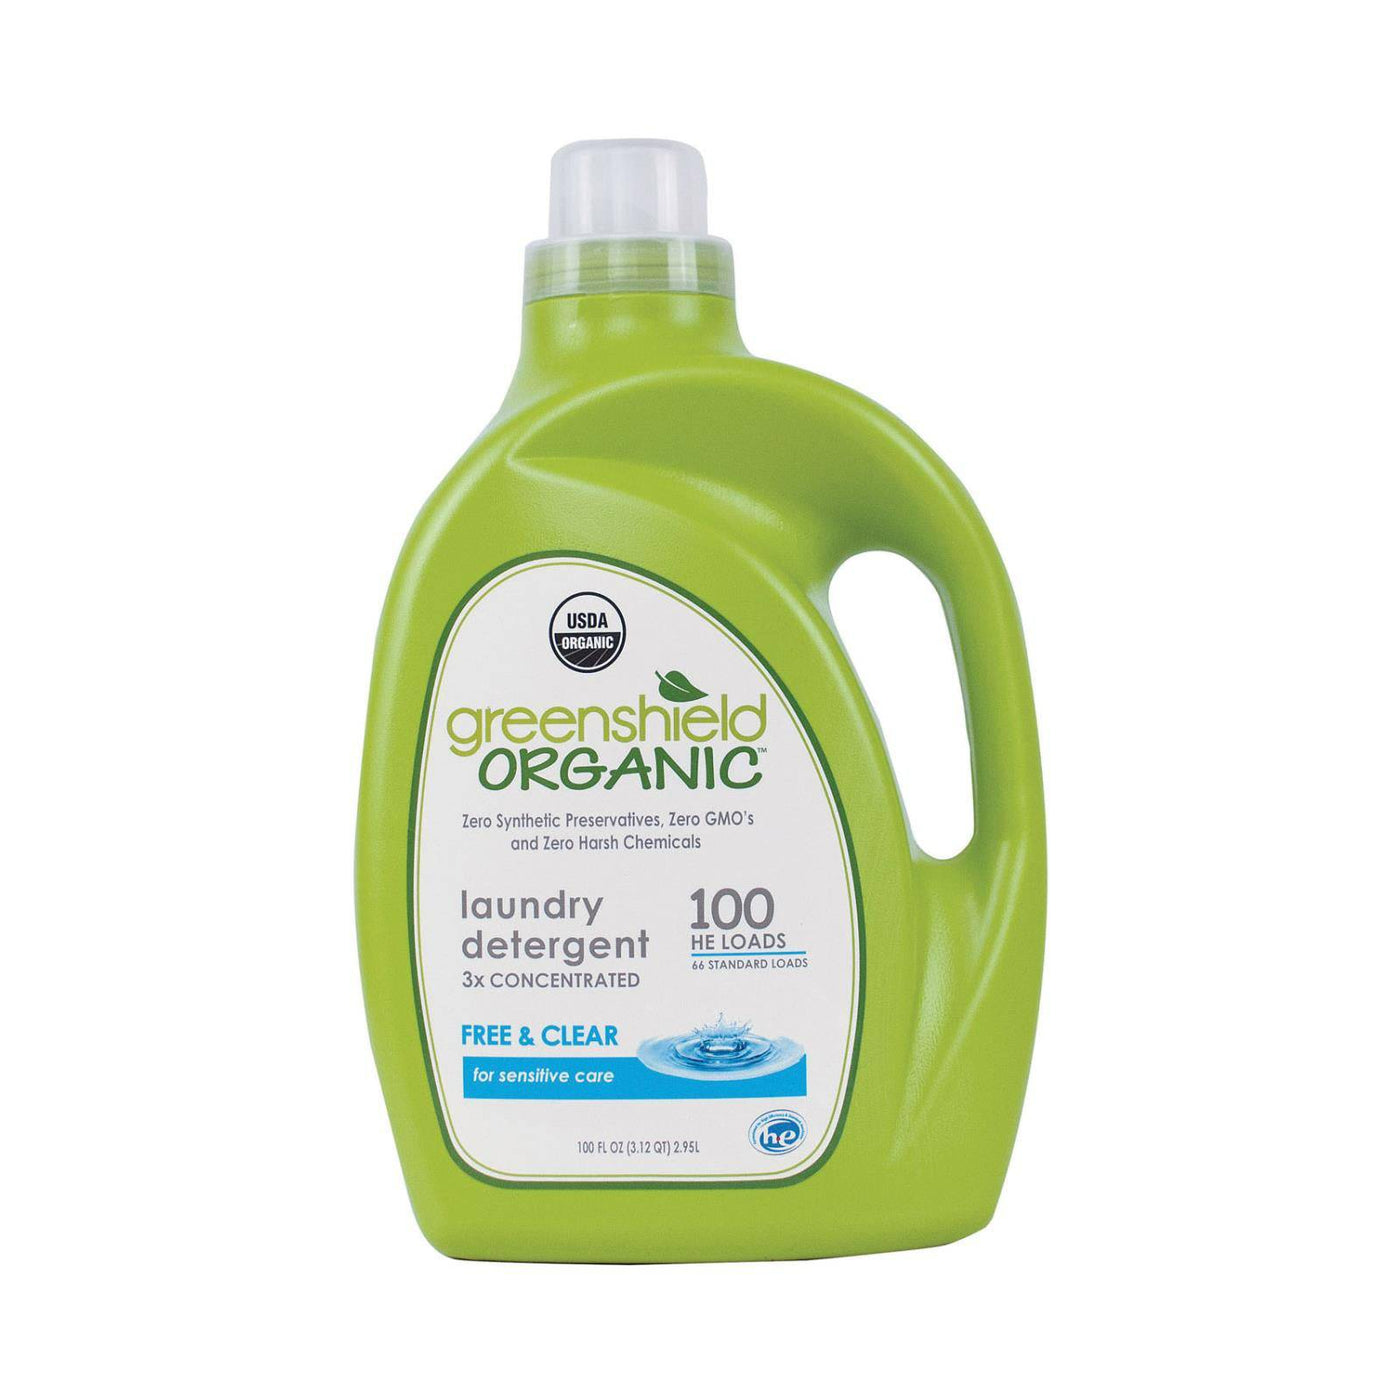 Buy Green Shield Organic Laundry Detergent - Free And Clear - Case Of 2 - 100 Fl Oz.  at OnlyNaturals.us